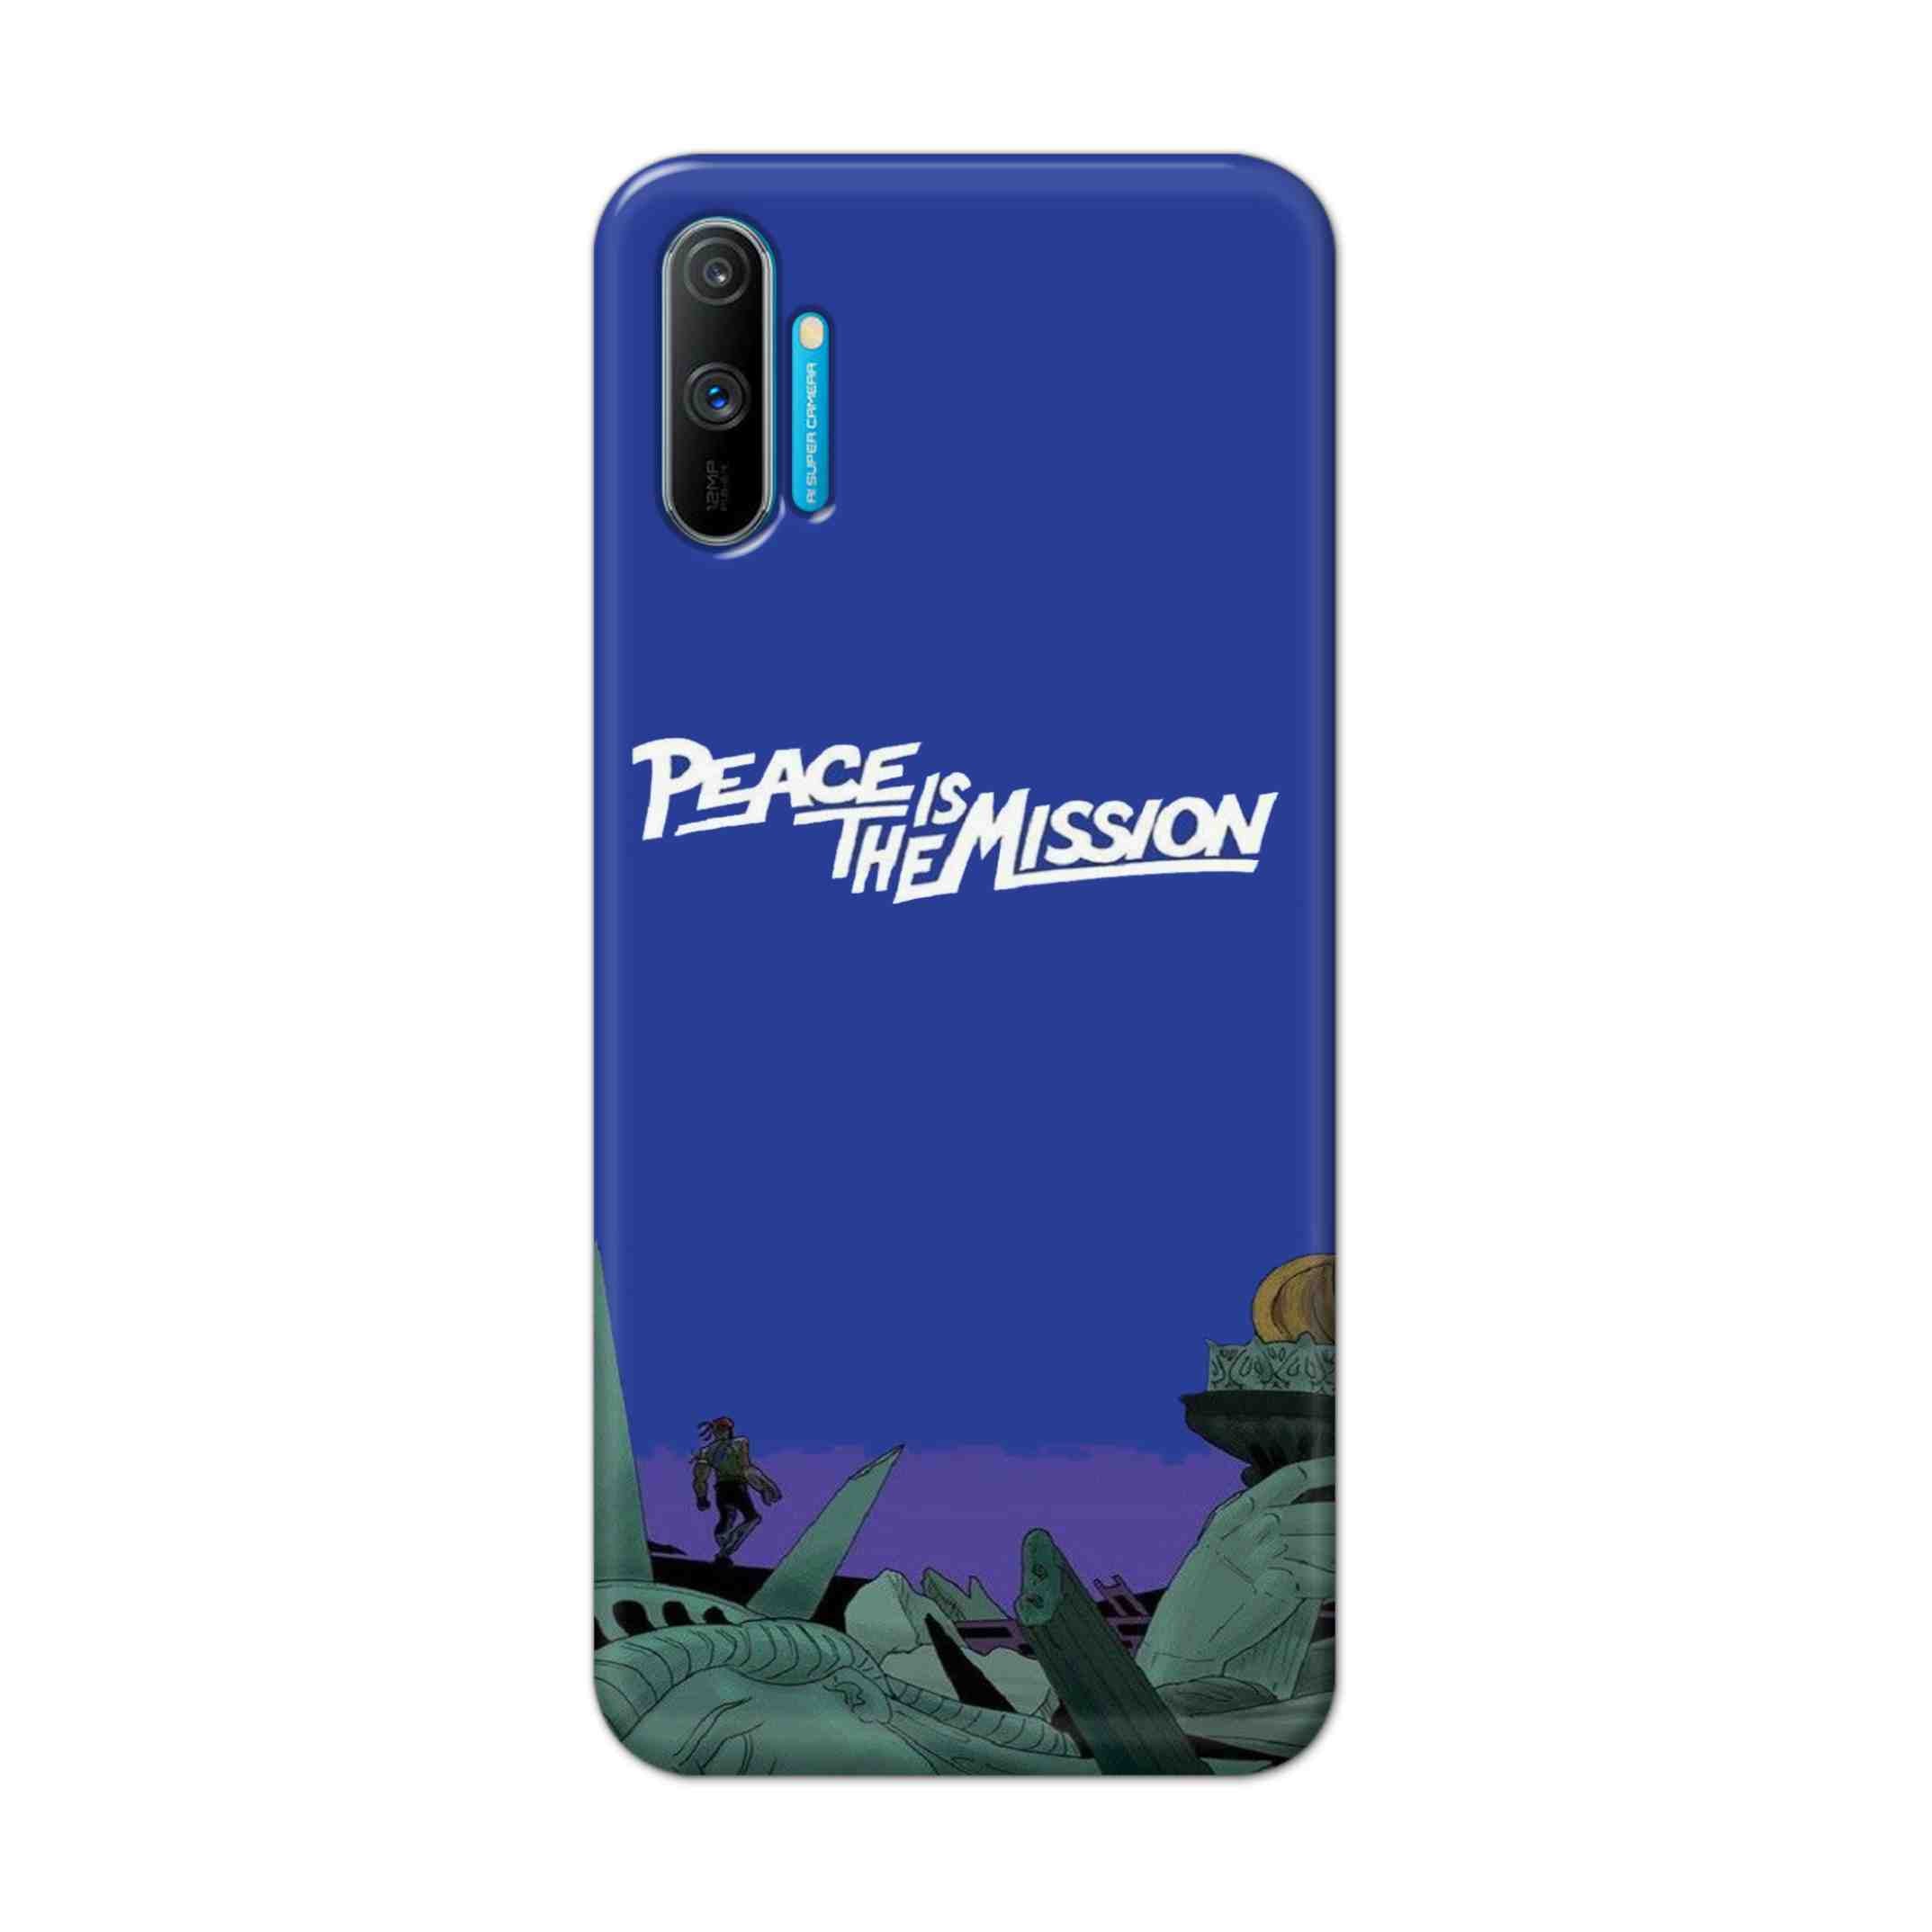 Buy Peace Is The Misson Hard Back Mobile Phone Case Cover For Realme C3 Online